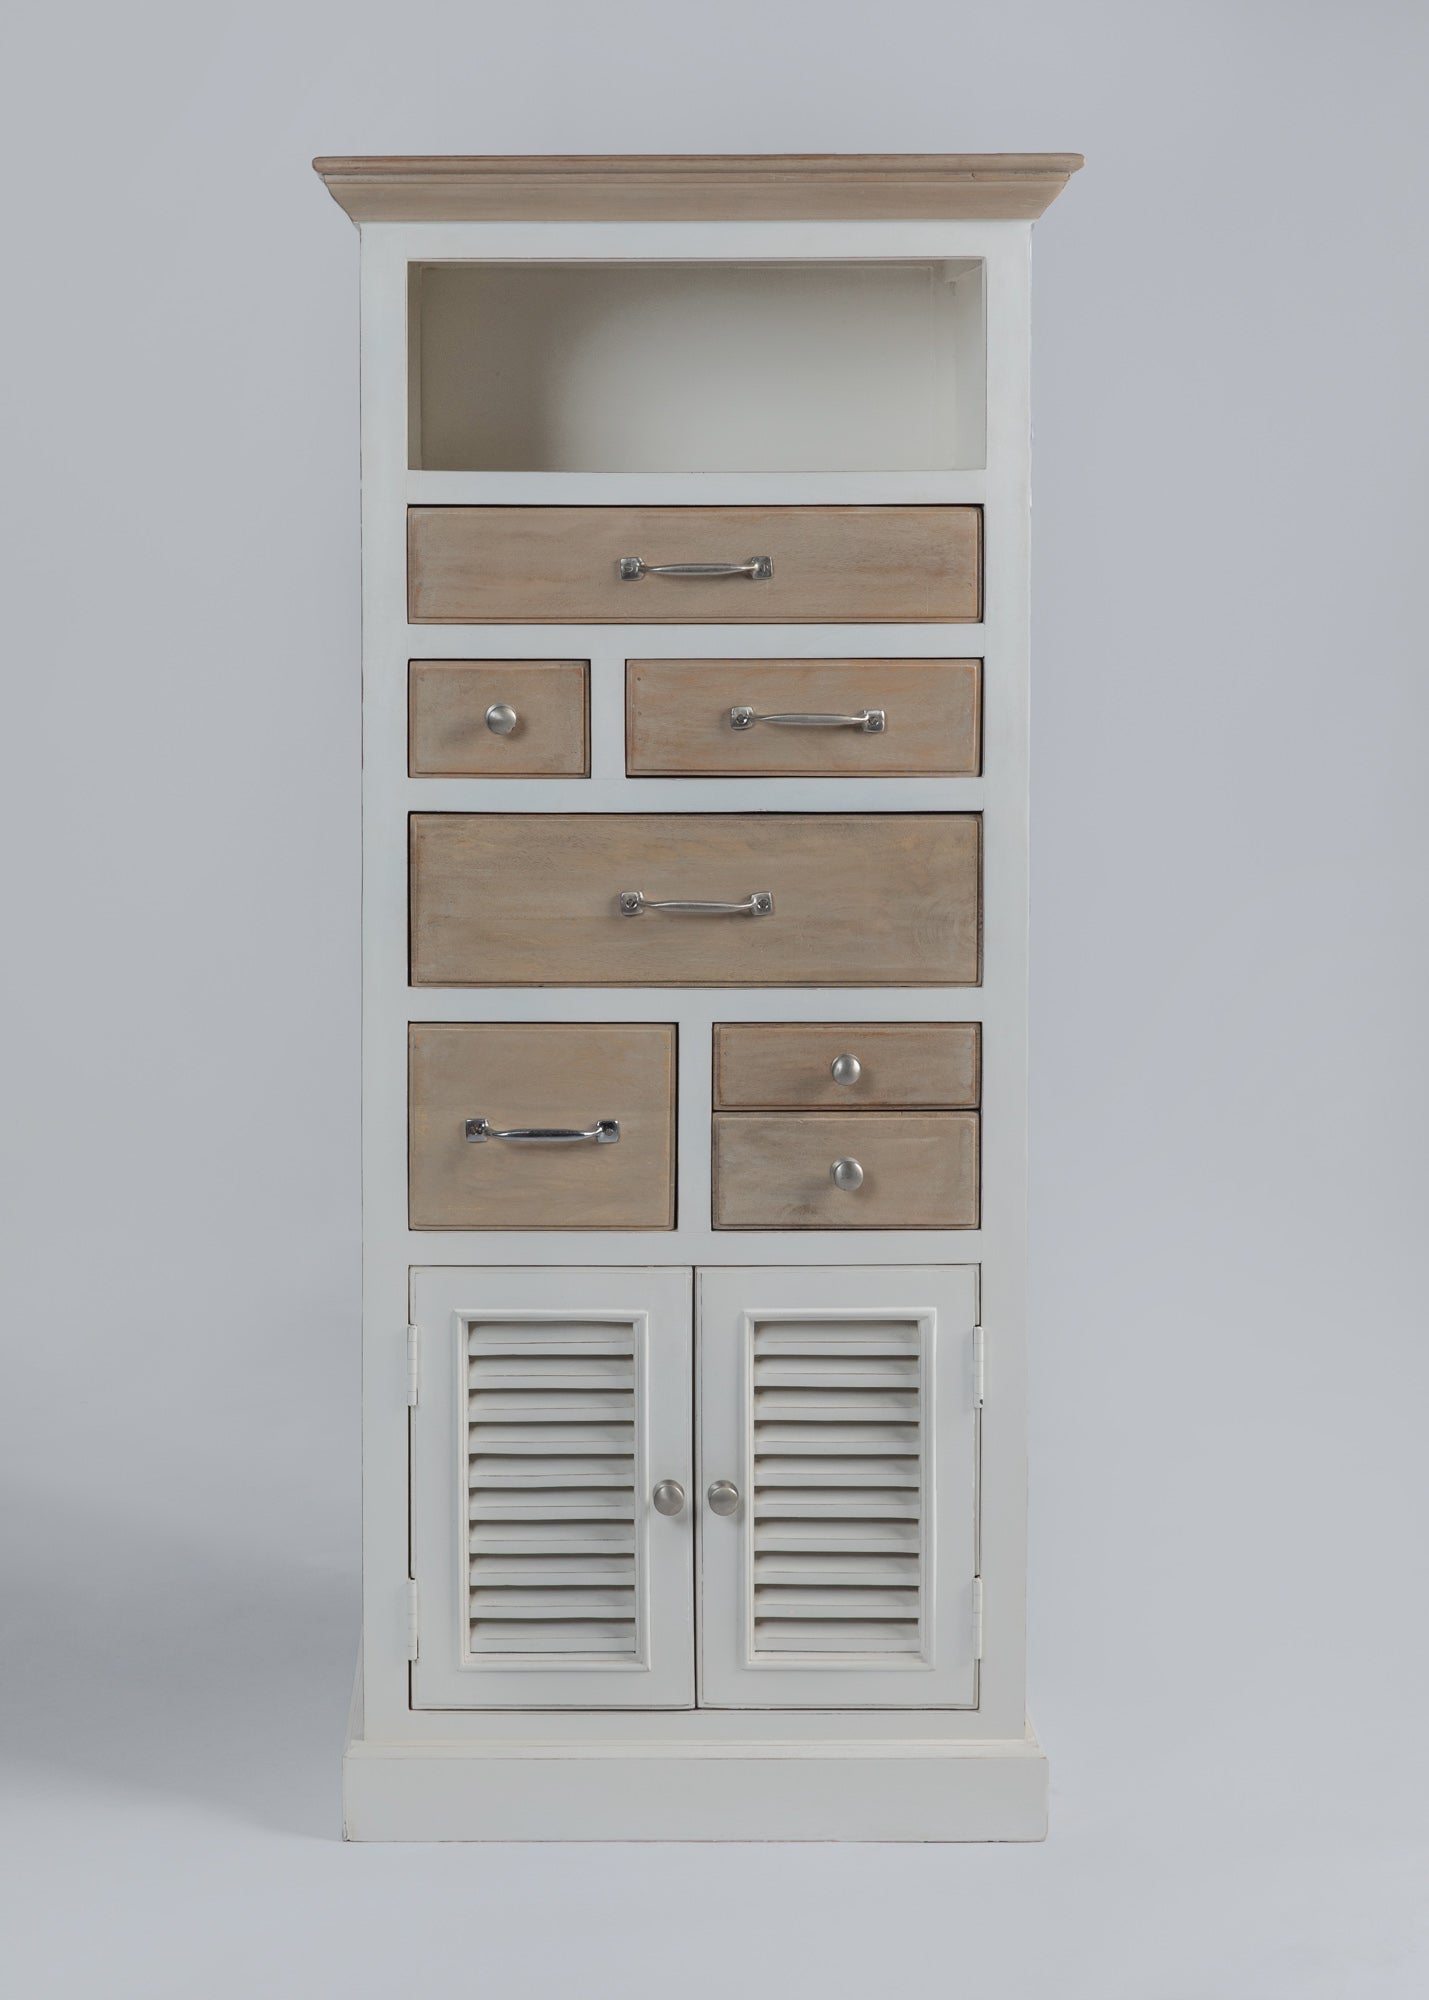 Jerome Utility Cabinet - Savana Living - One With Wood